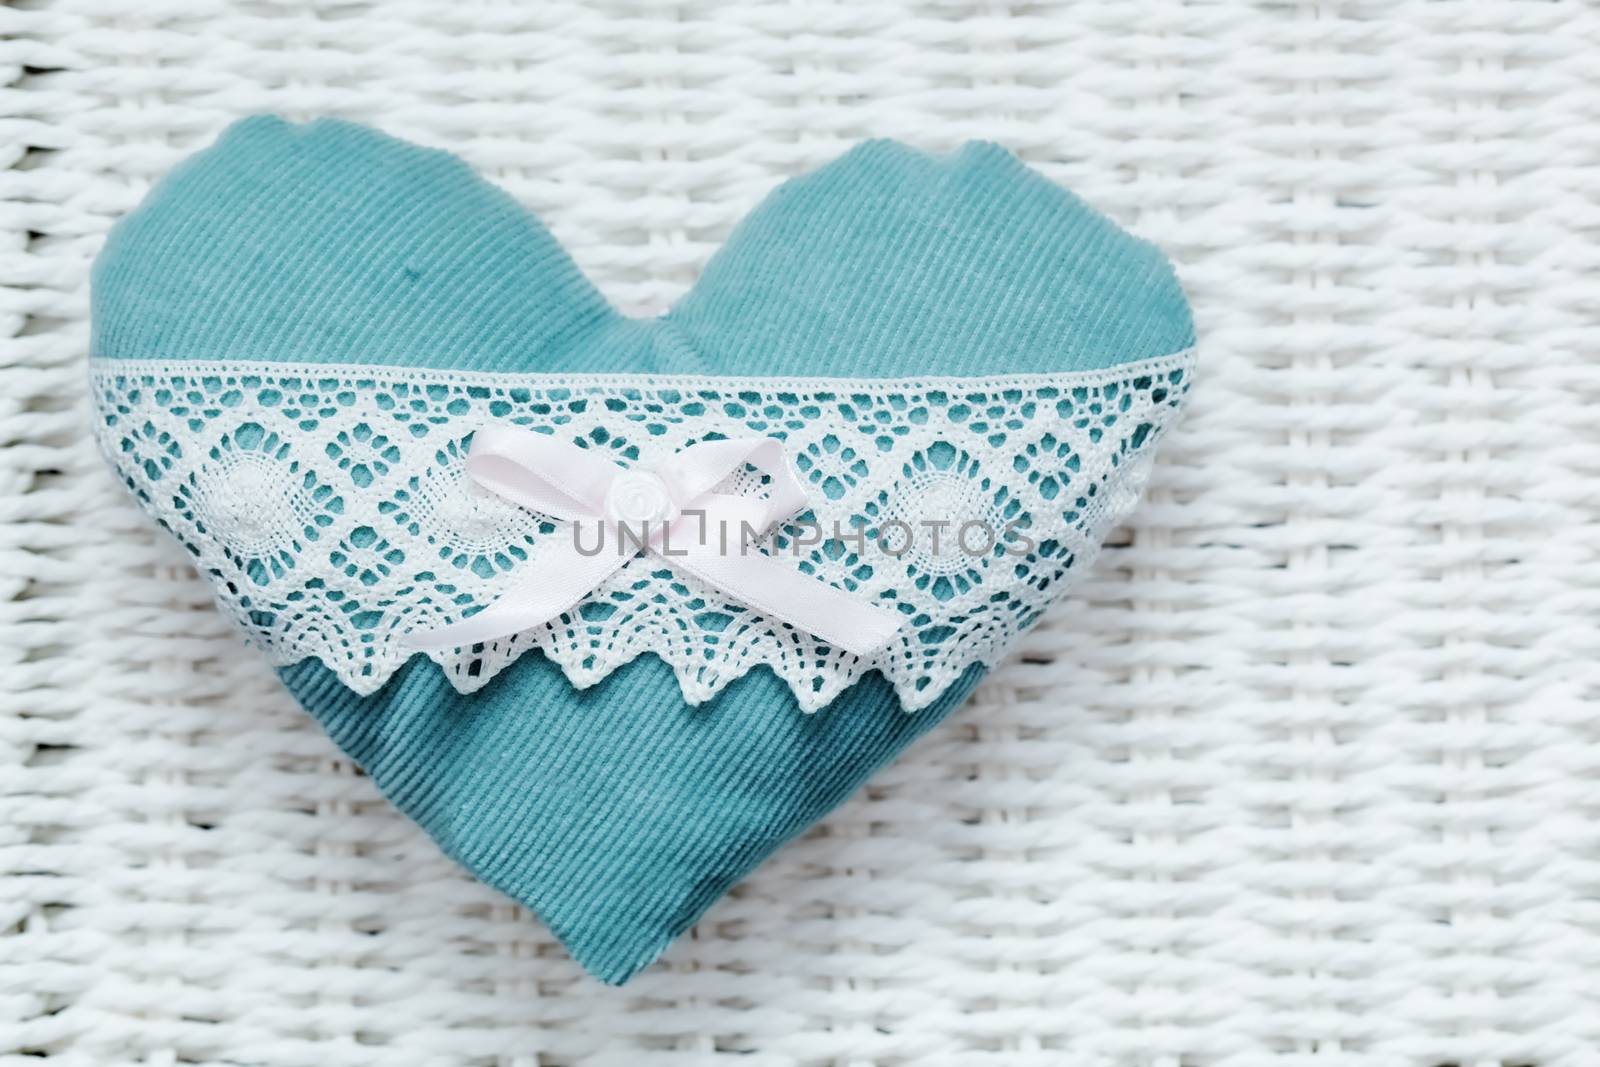 Vintage handmade plush turquoise heart on white rustic wicker by photocreo